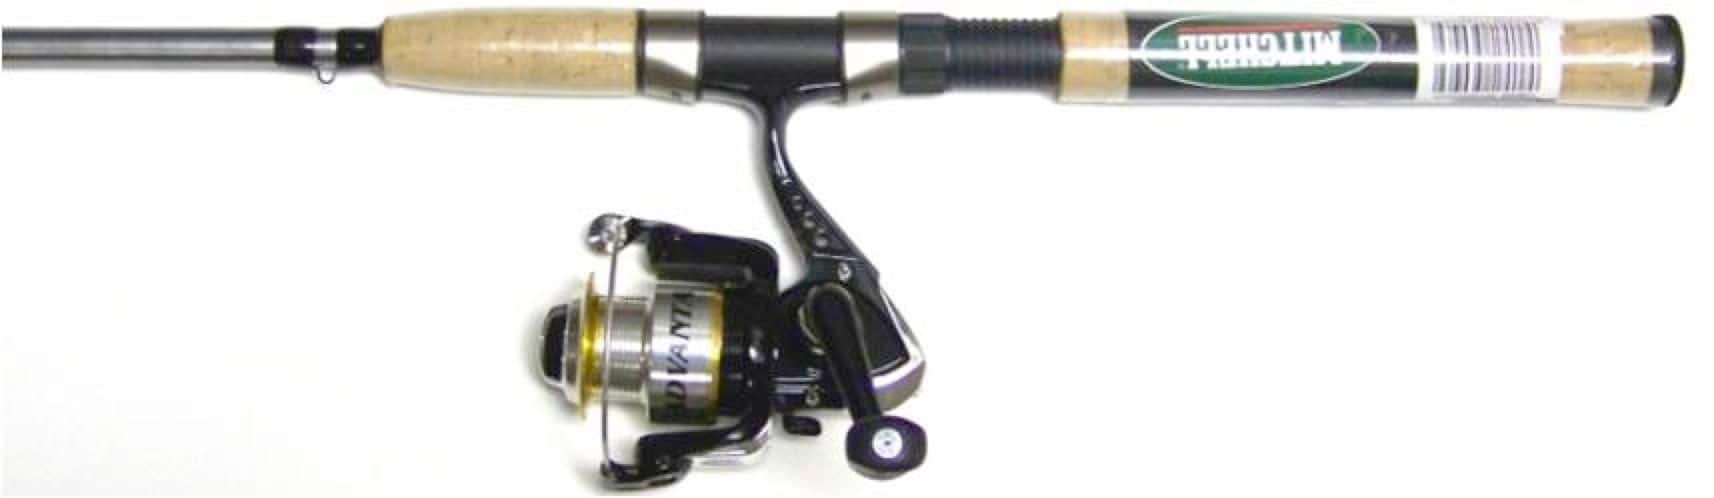 Mitchell Performance Boat Fishing Rod and Multiplier Reel Combo Set - Ready  to fish with fishing line - For Mackerel, Cod, Bass and Pollack